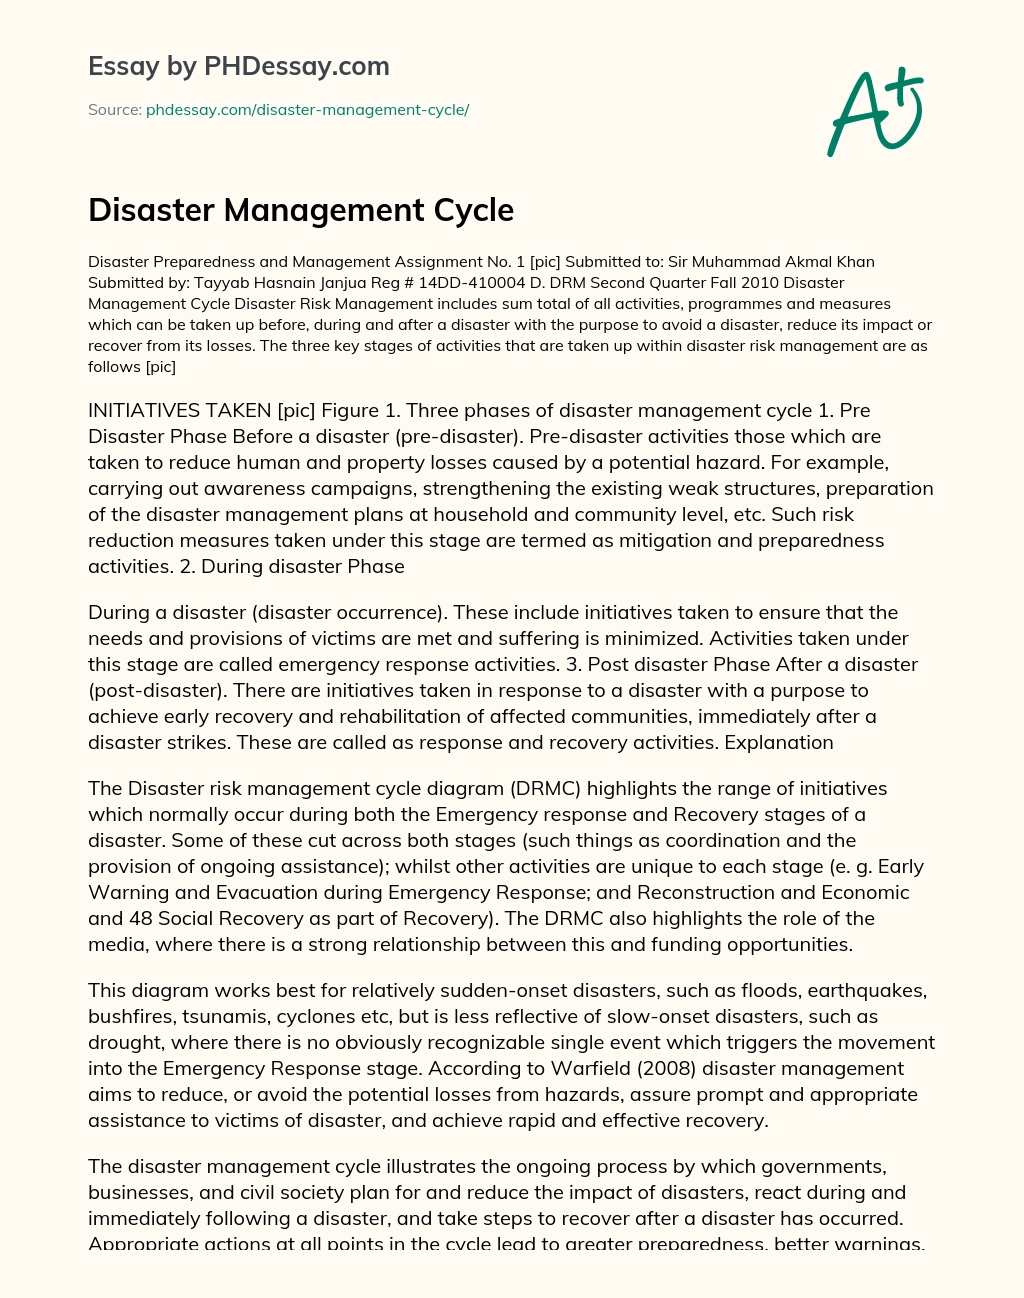 Disaster Management Cycle essay